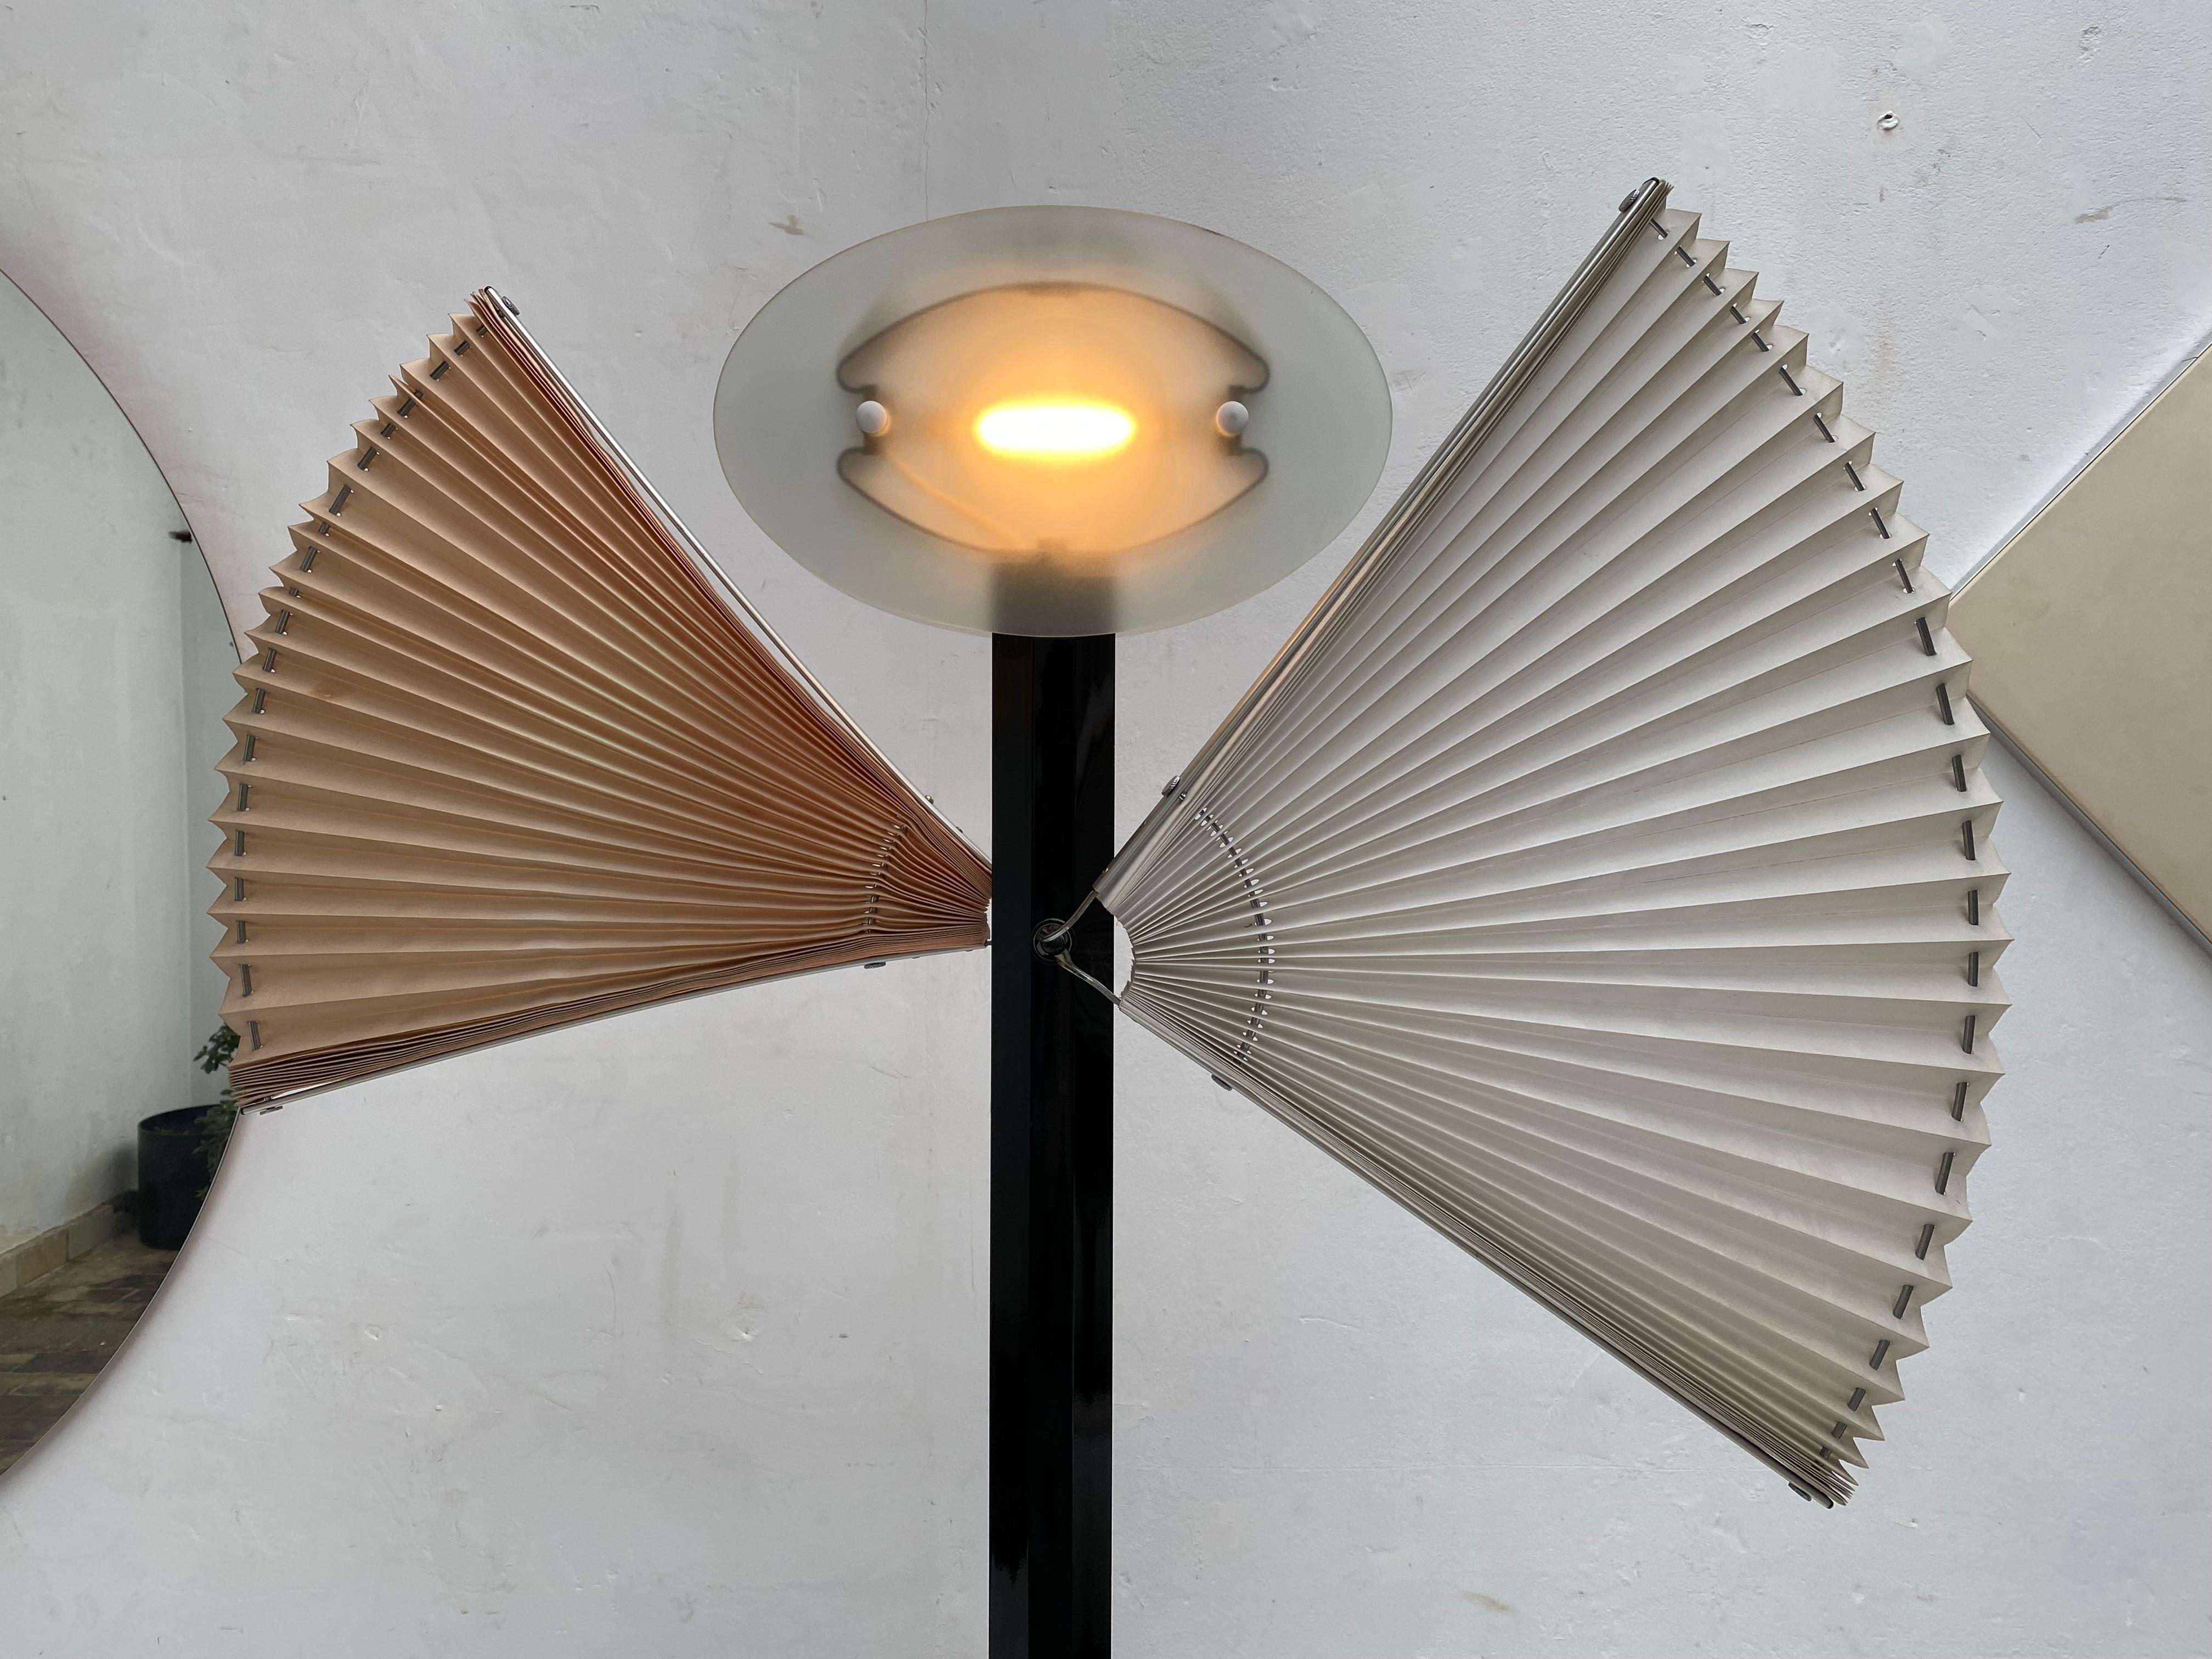 Important Post Modern 'Butterfly'  Floorlamp by Afra & Tobia Scarpa for Flos Italy 1985

The heat-resistant synthetic fabric 'butterfly' wings can be adjusted in size and position to create your own artistic way of illumination in your space

There